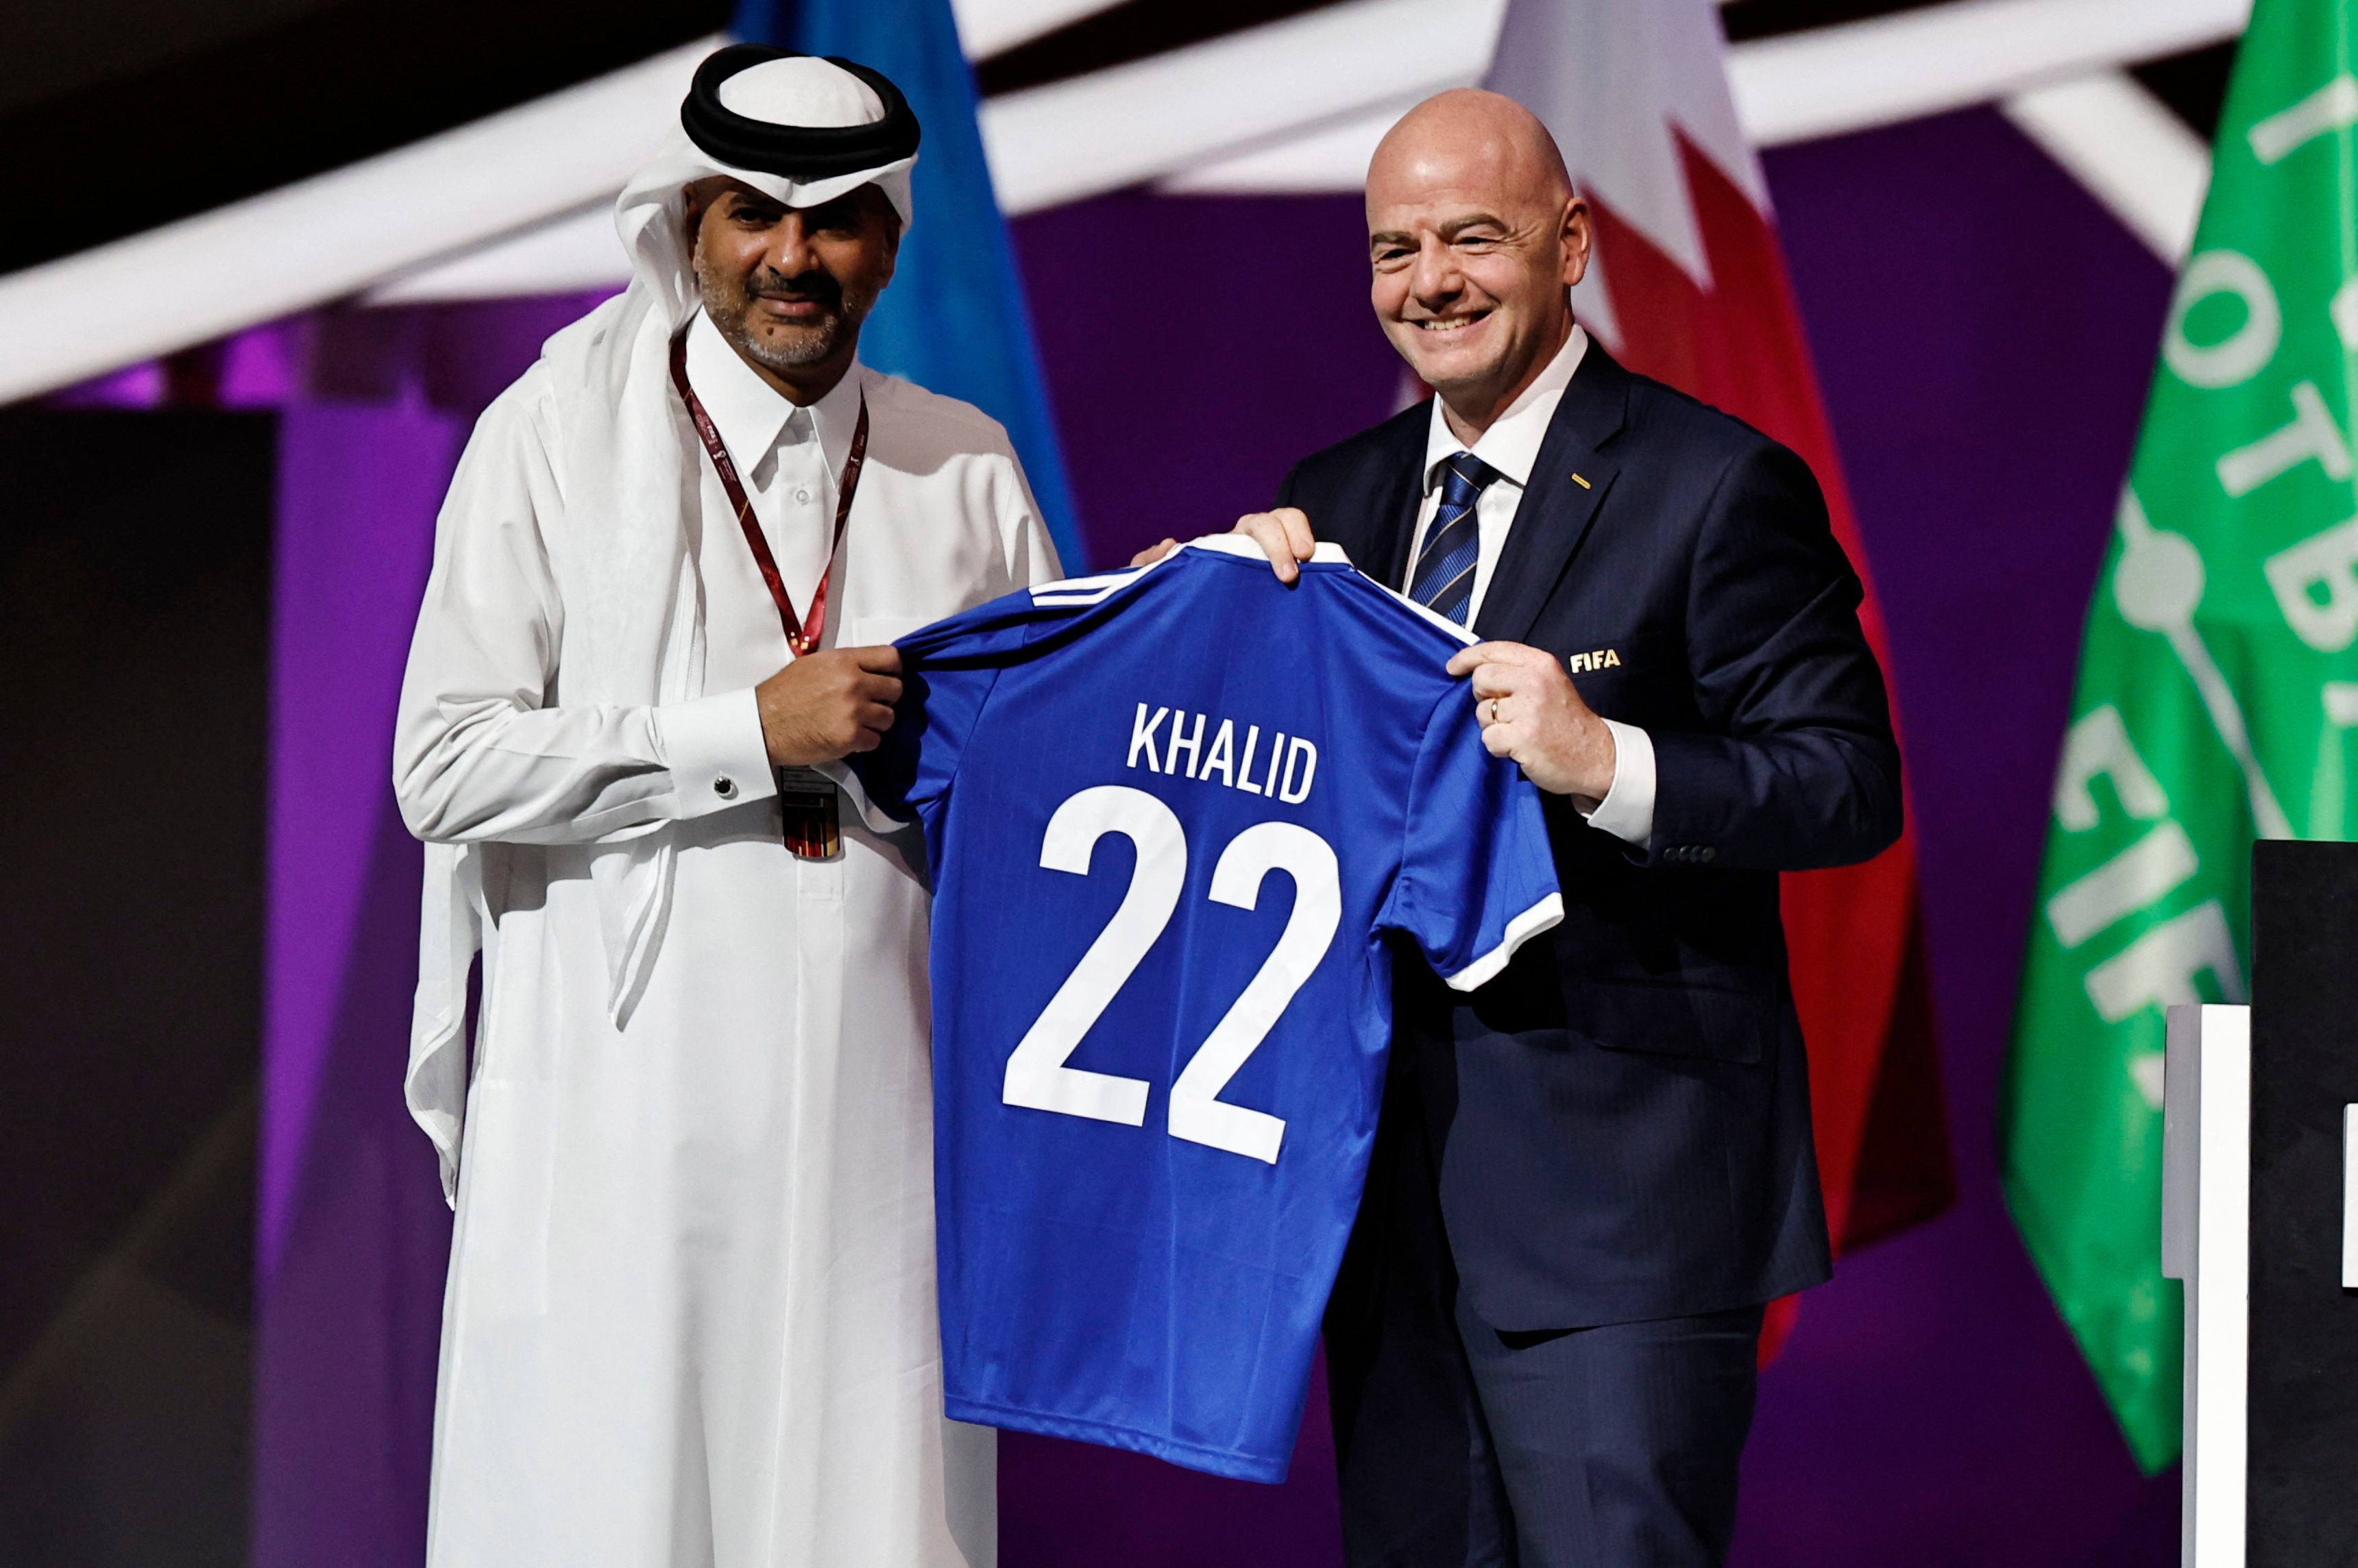 Fifa president Gianni Infantino poses with the prime minister of Qatar